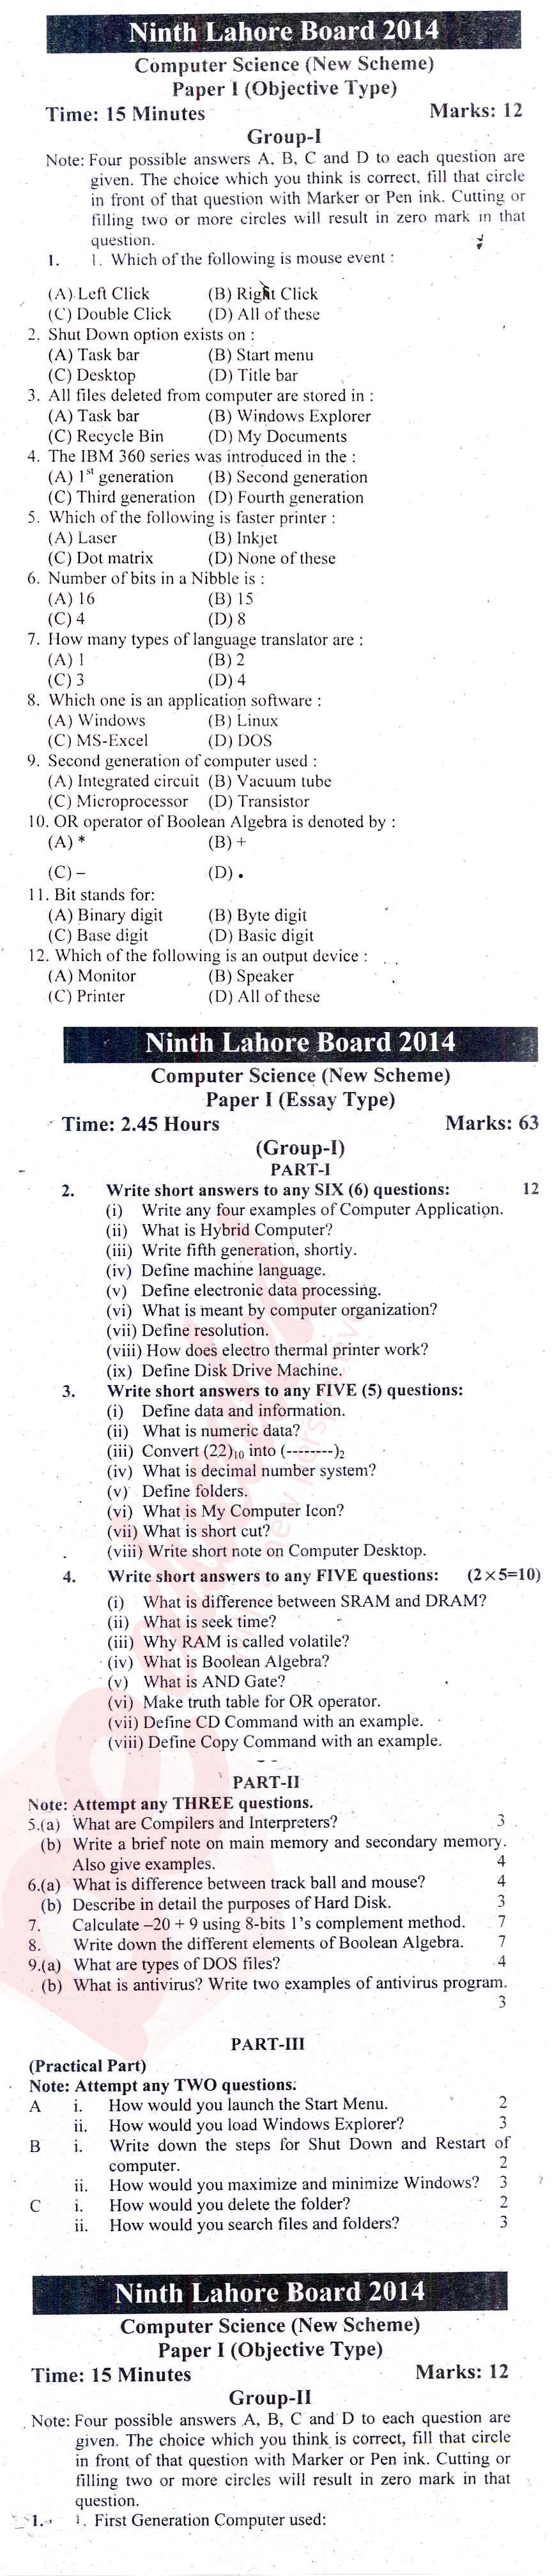 Computer Science 9th English Medium Past Paper Group 1 BISE Lahore 2014